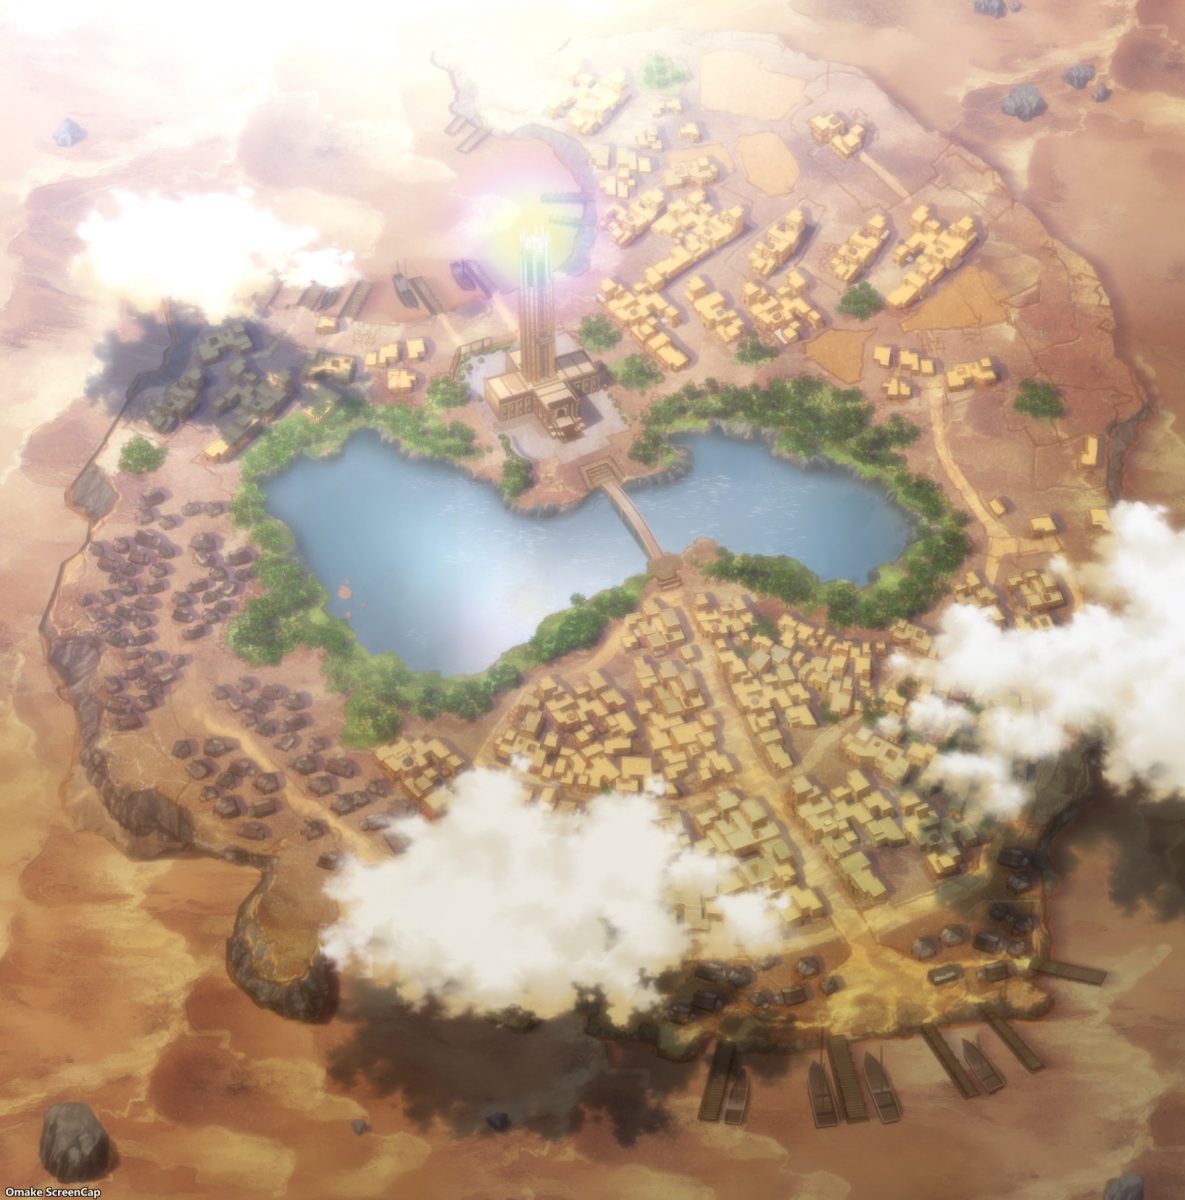 Isekai Maou S2 Episode 2 Zircon Tower City Aerial View